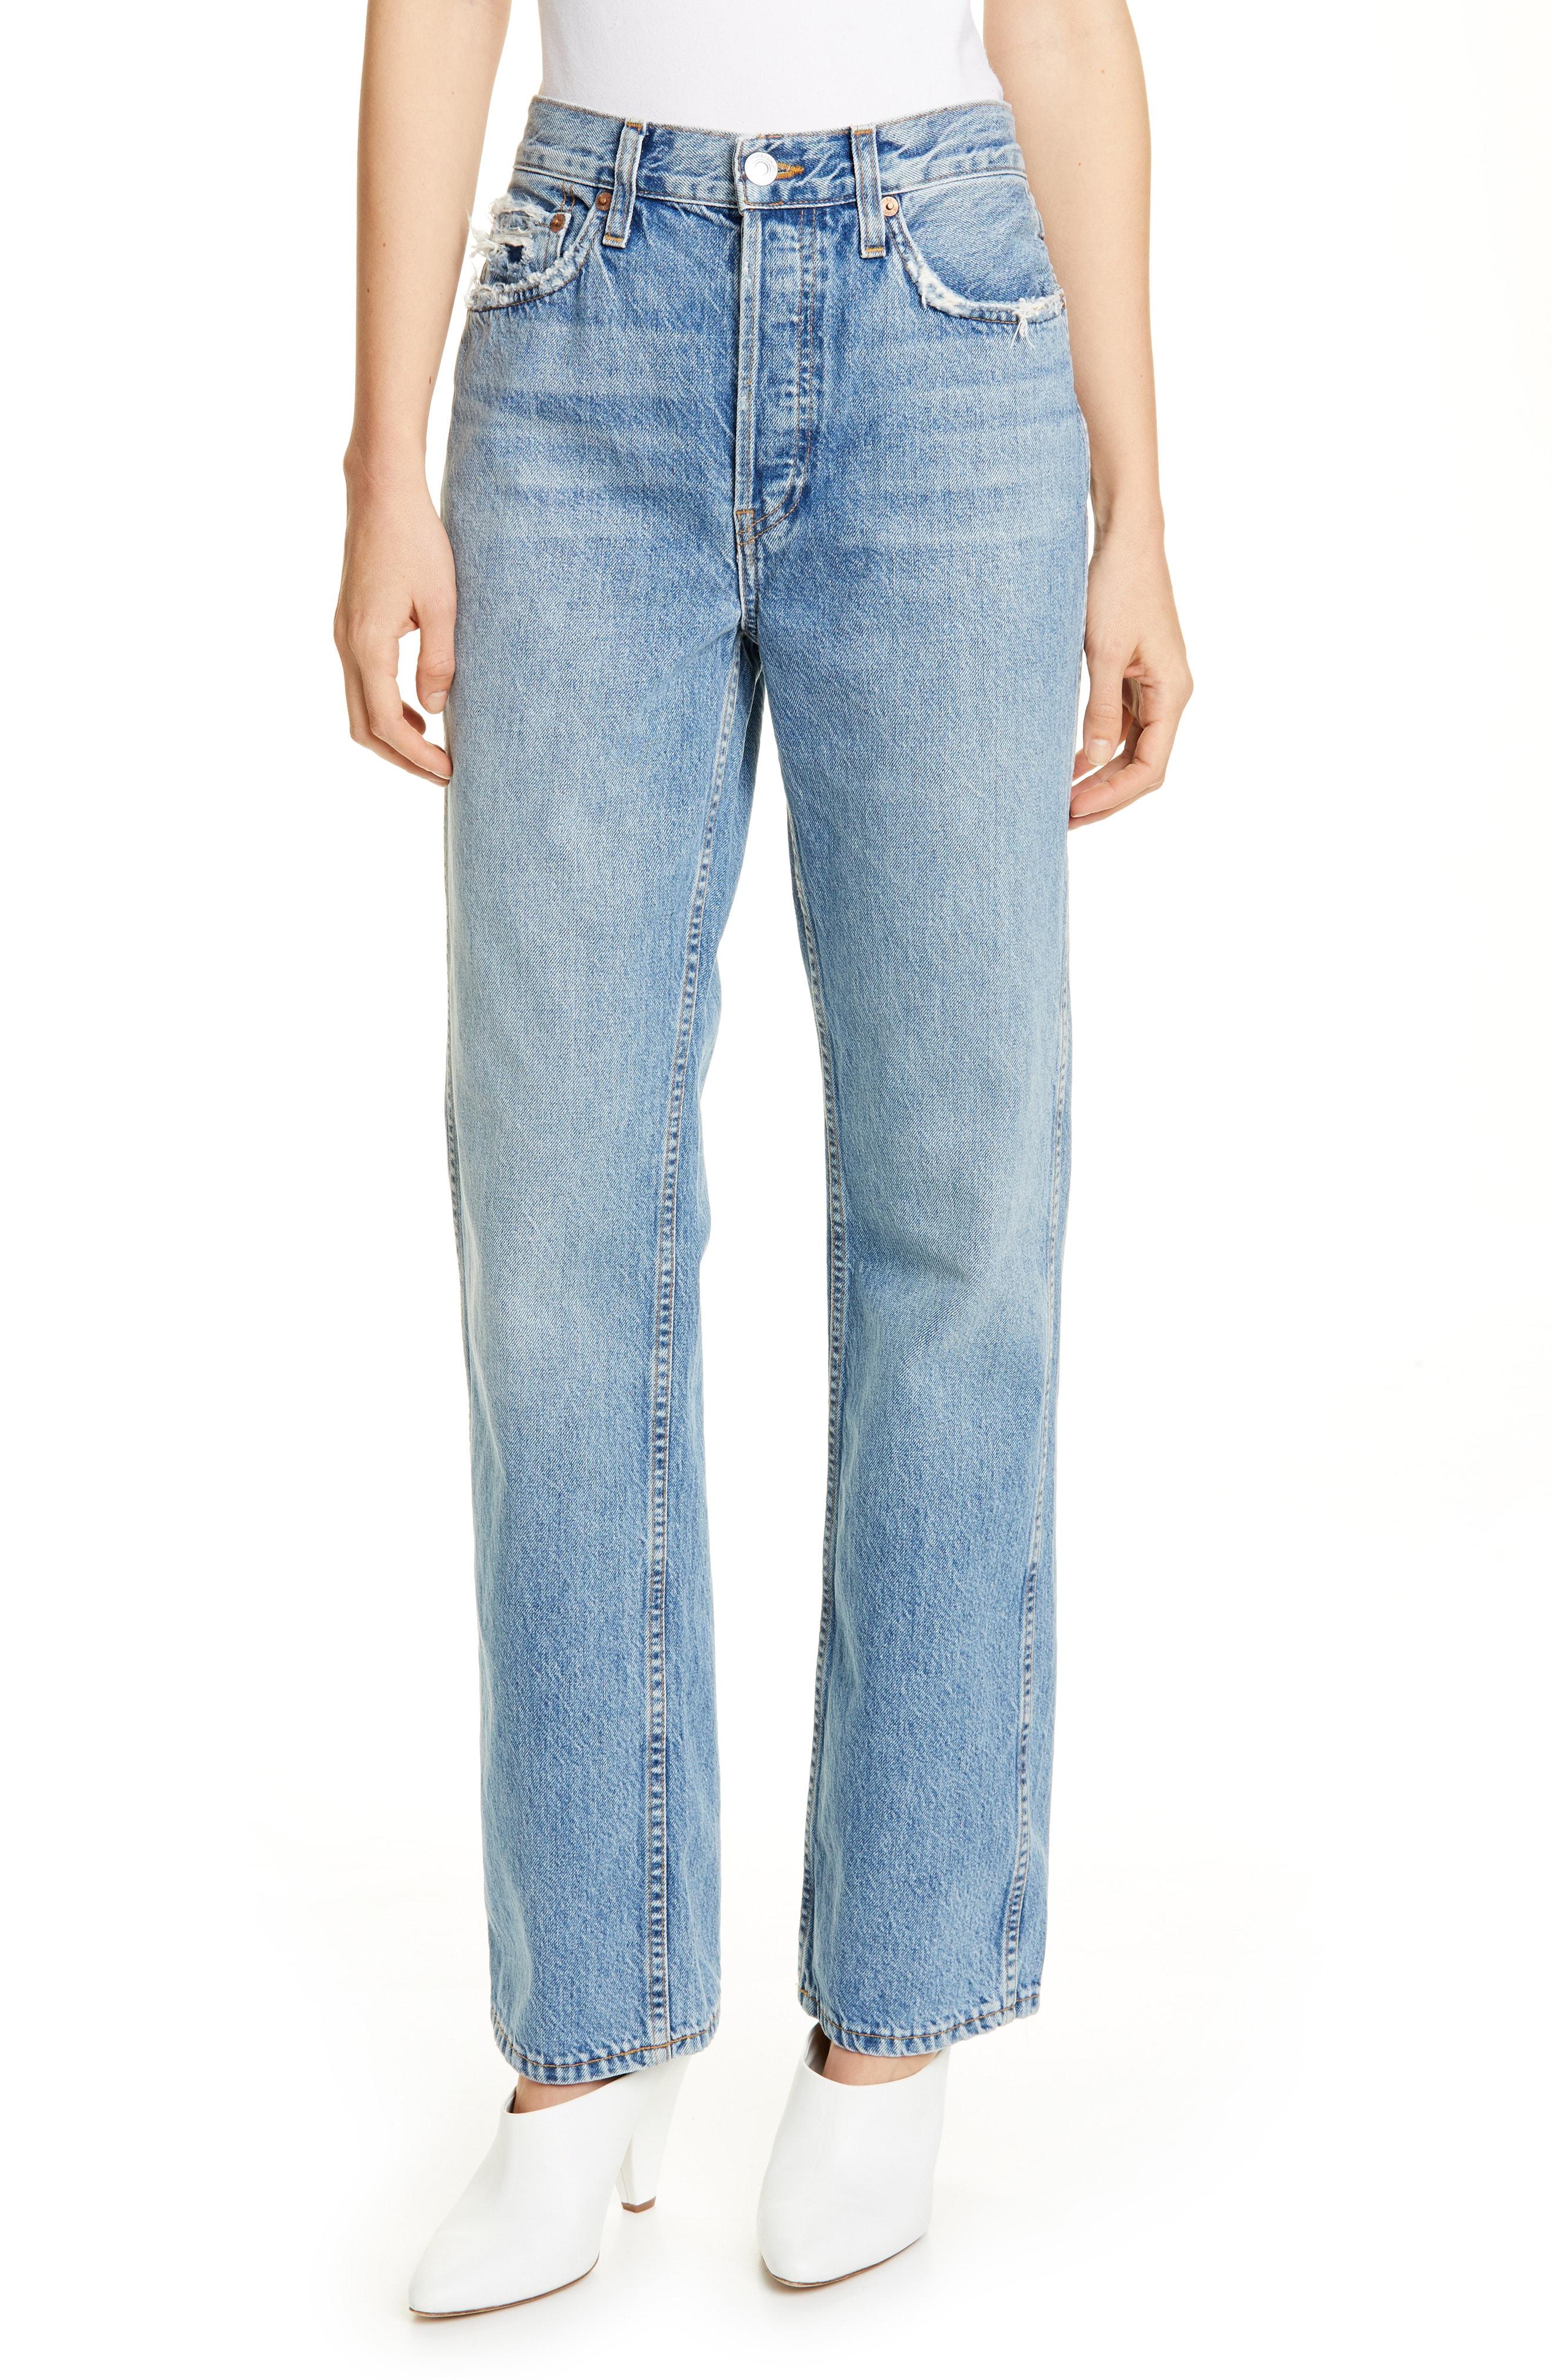 Lyst - RE/DONE Originals High Waist Loose Jeans in Blue